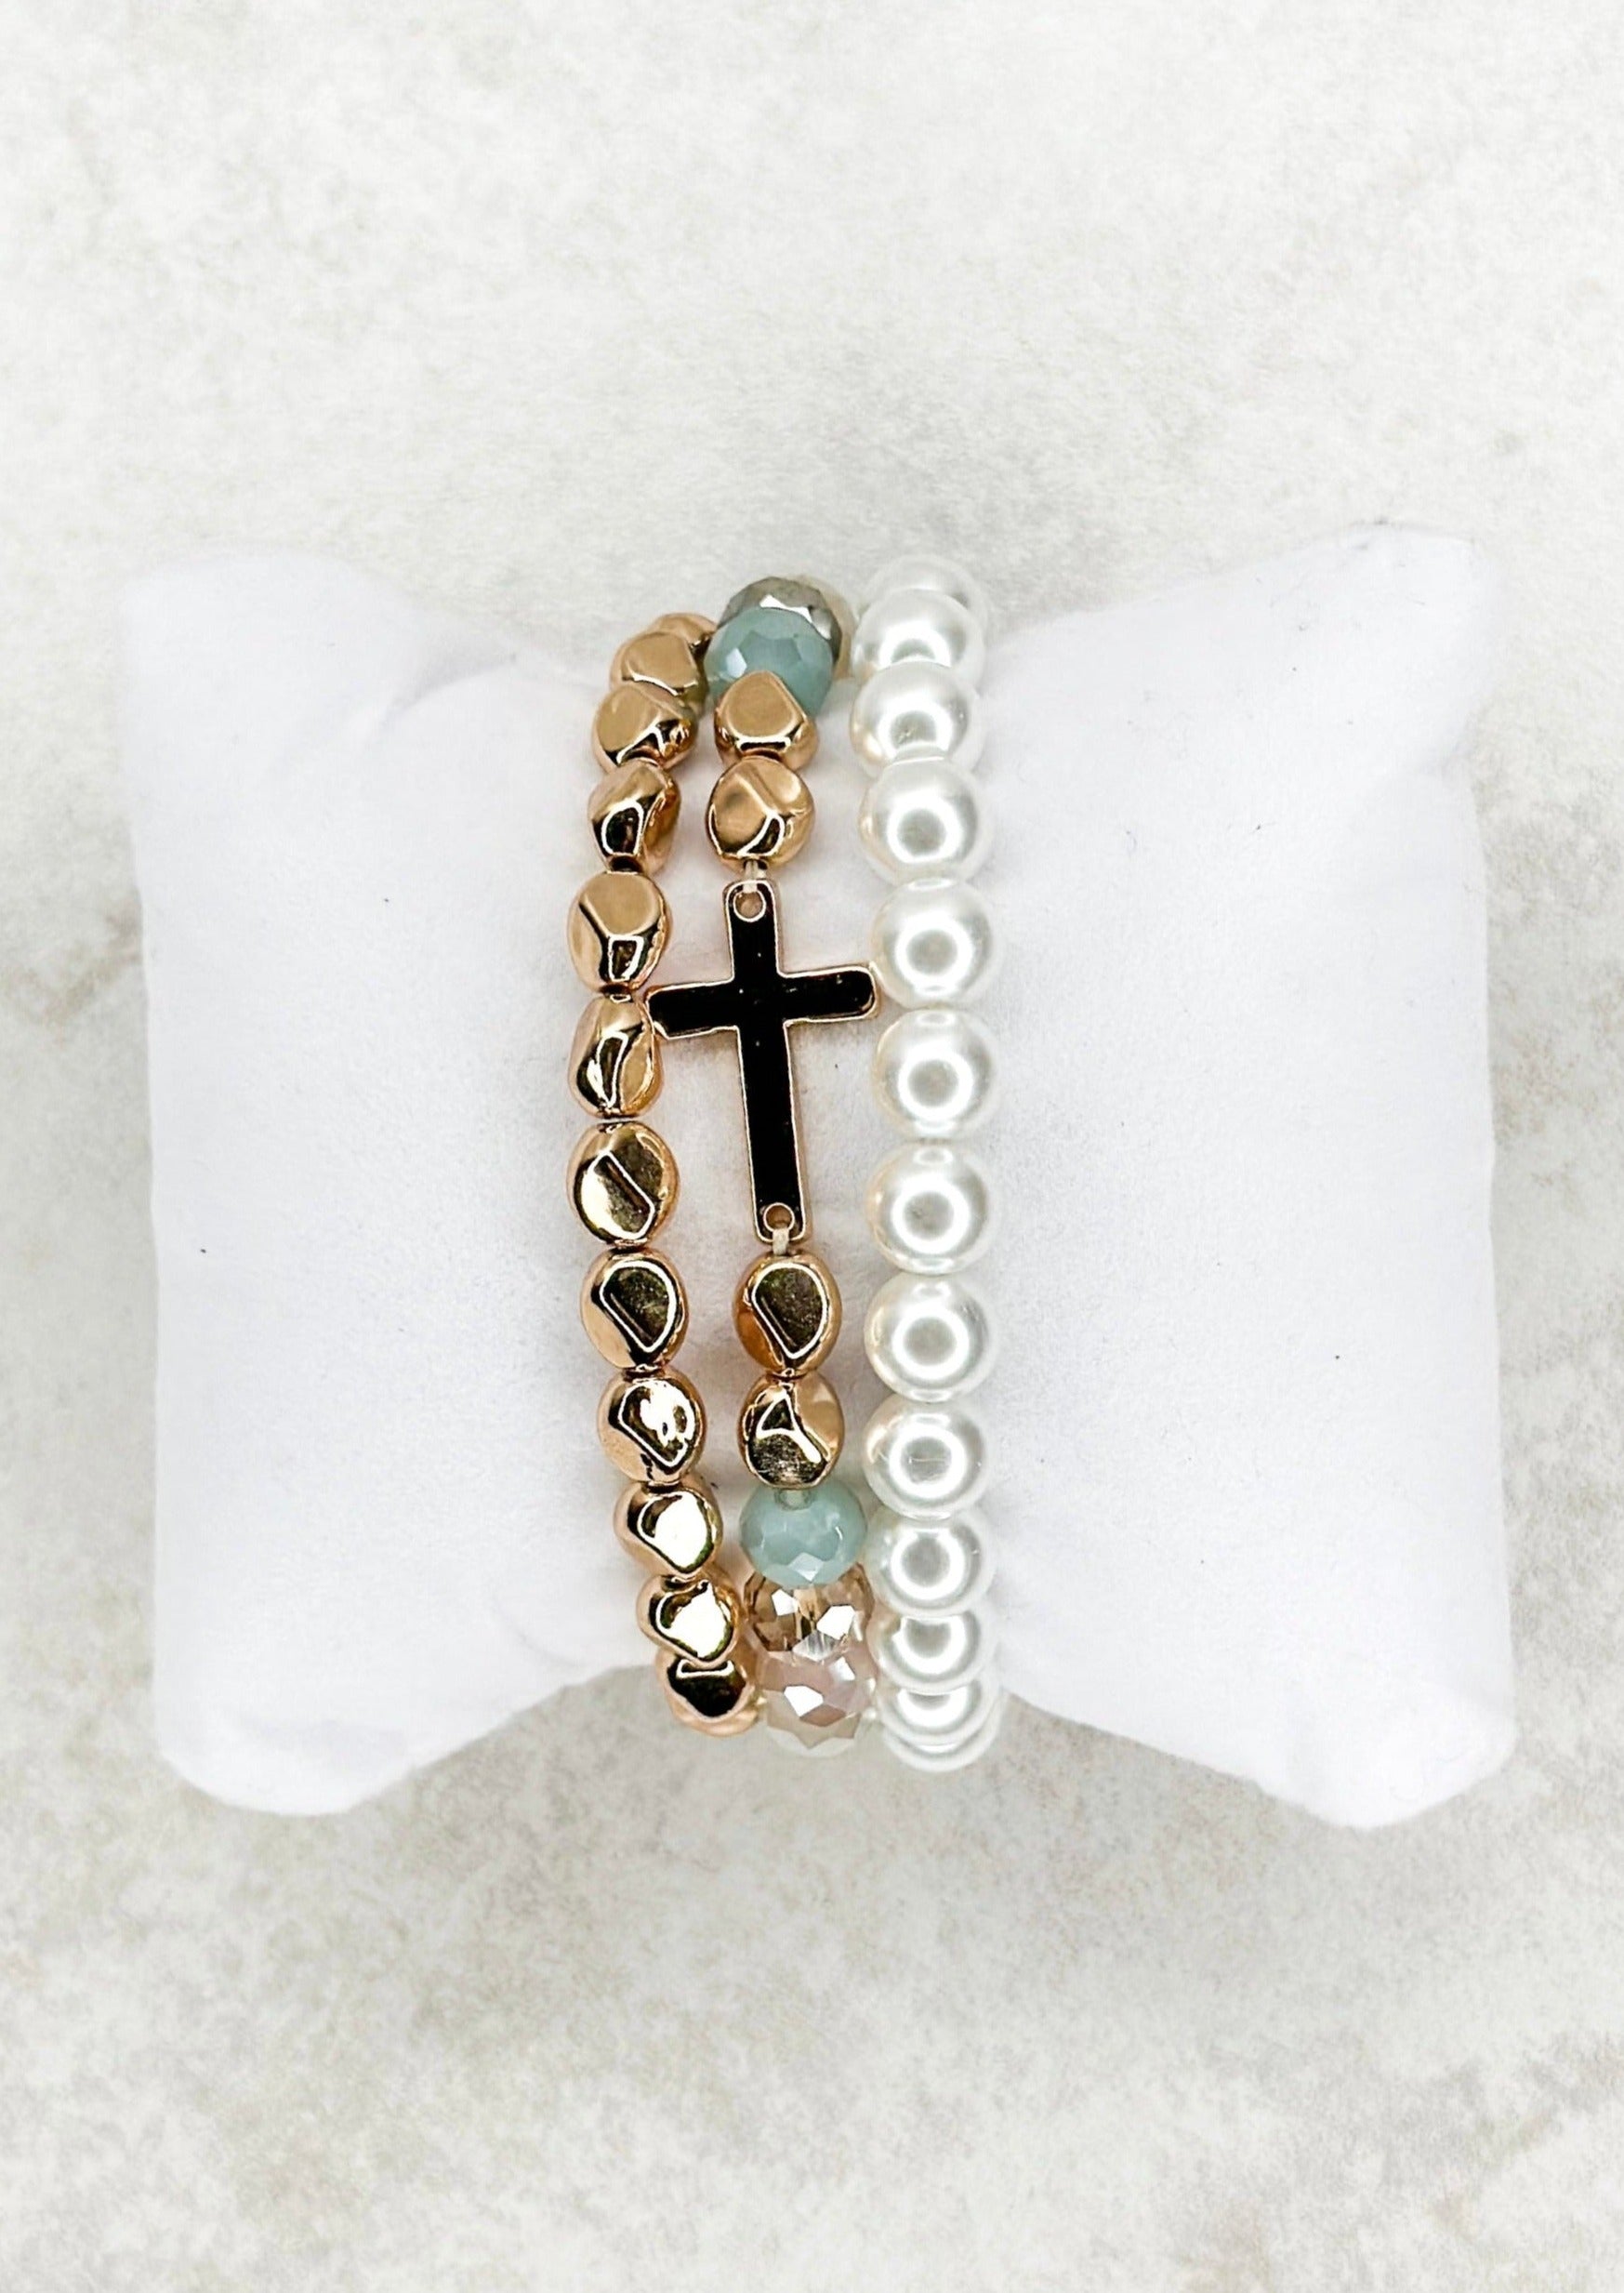 3 strand beaded stretch bracelets - one gold, one white pearl looking - one multi colored with gold and a single gold cross